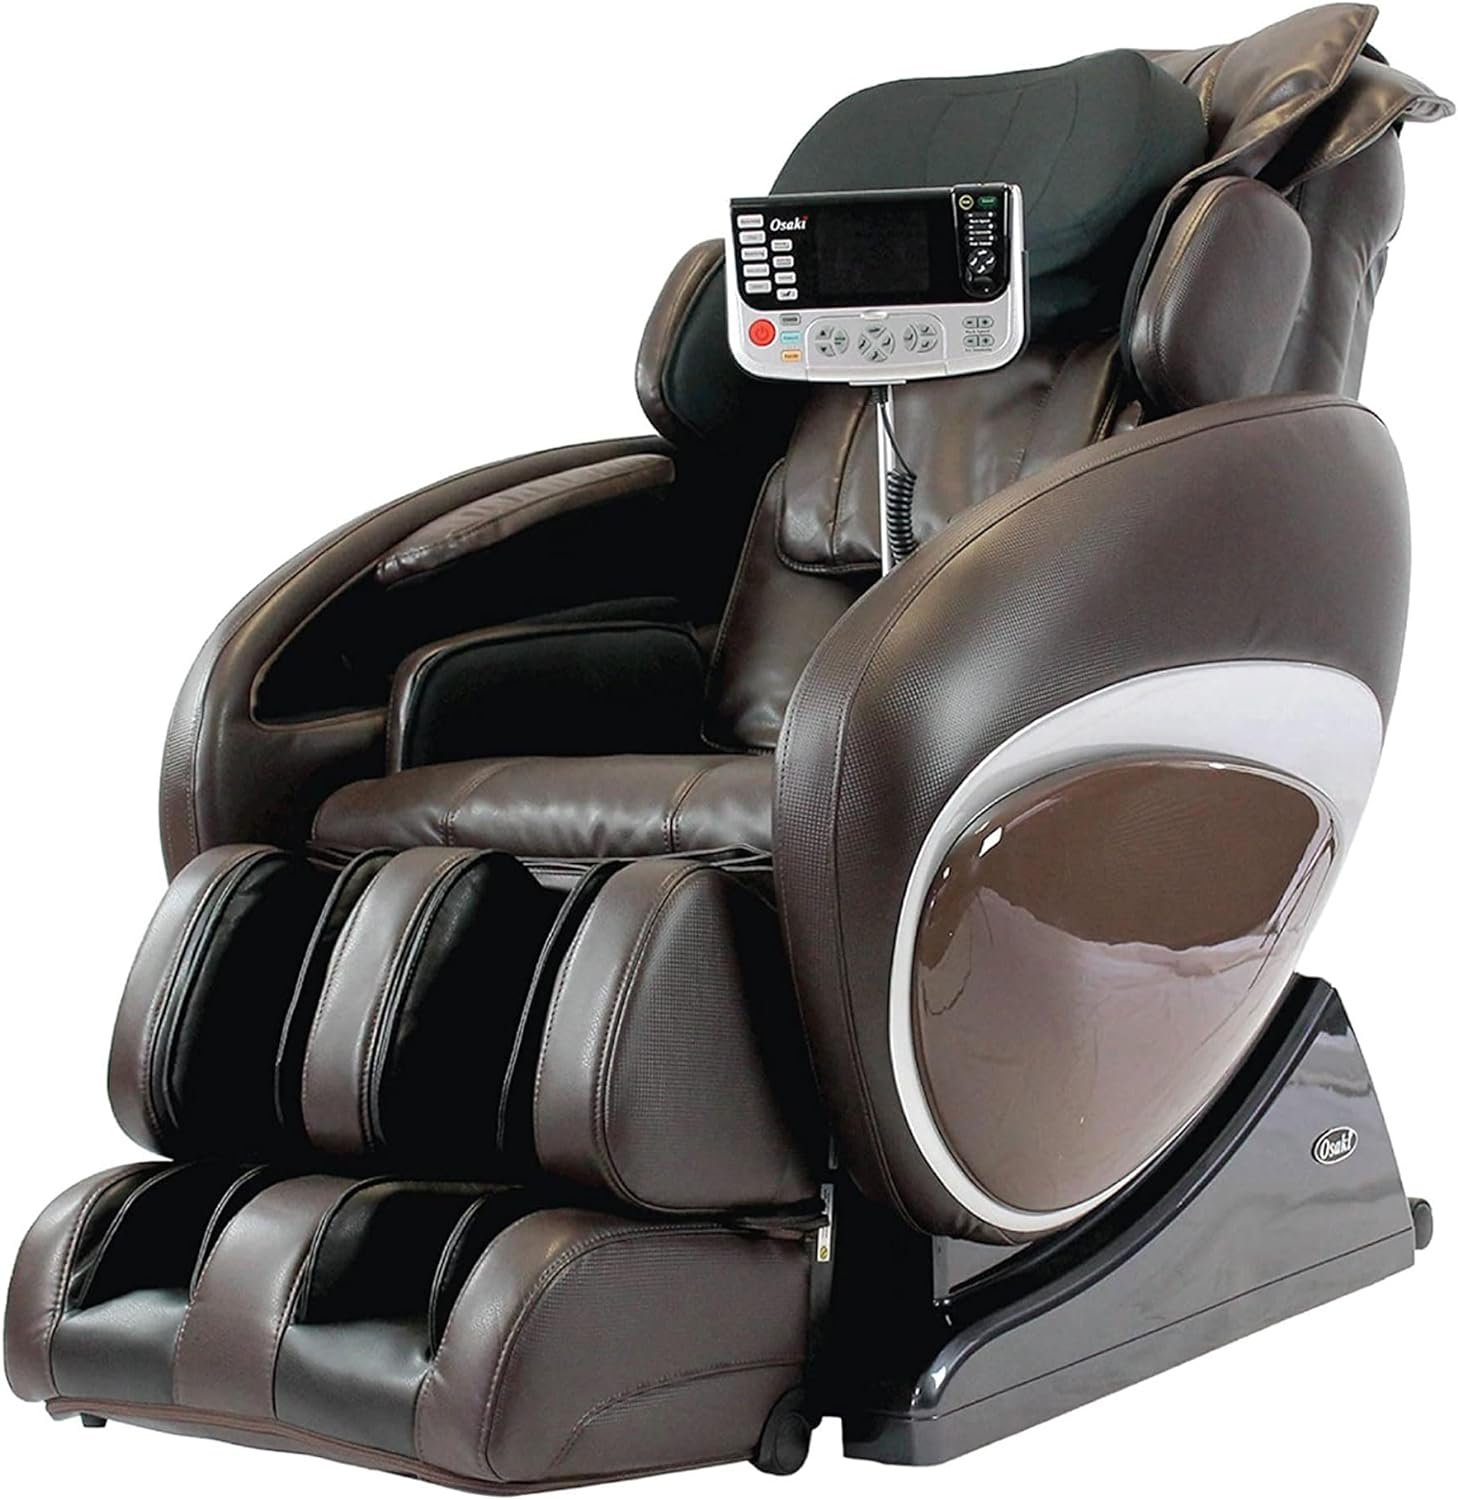 Osaki Zero Gravity Heated Reclining Full Body Massage Chair with Computer Body Scan, Foot Roller, Seat Vibration, and Remote Control, Brown